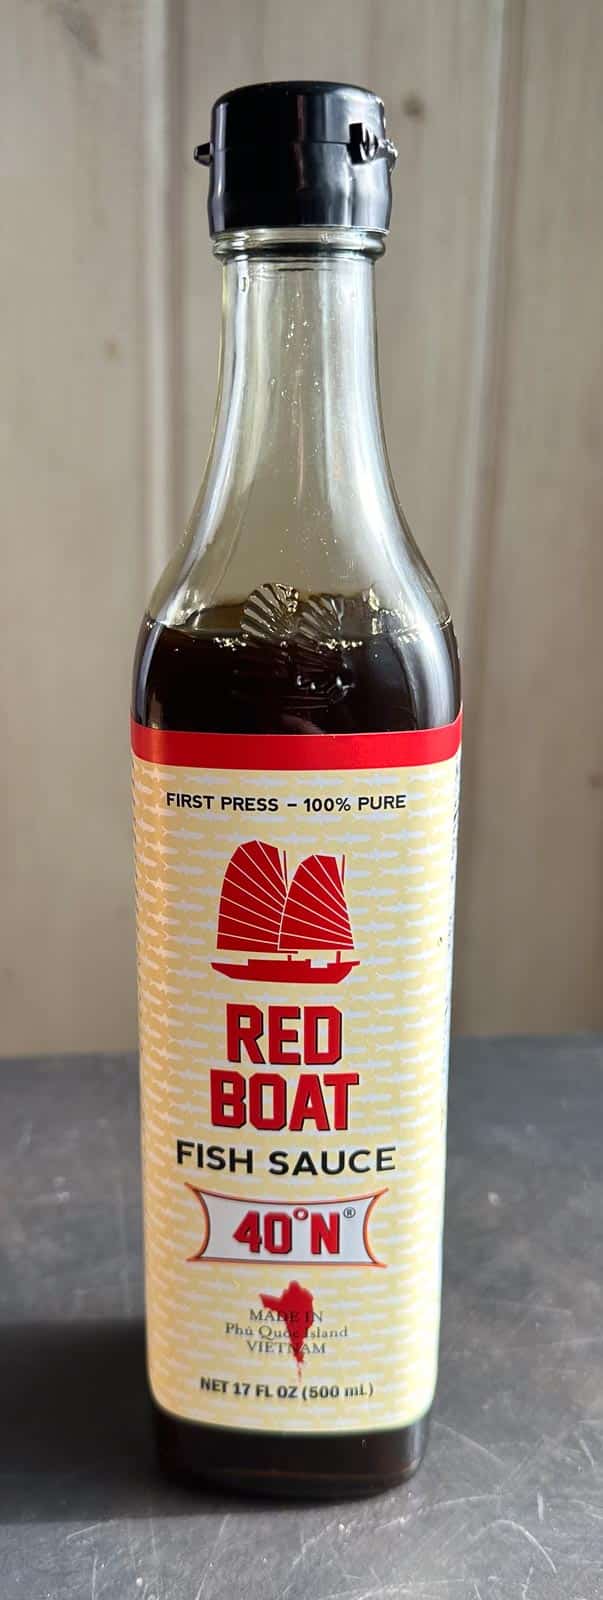 Red Boat fish sauce.